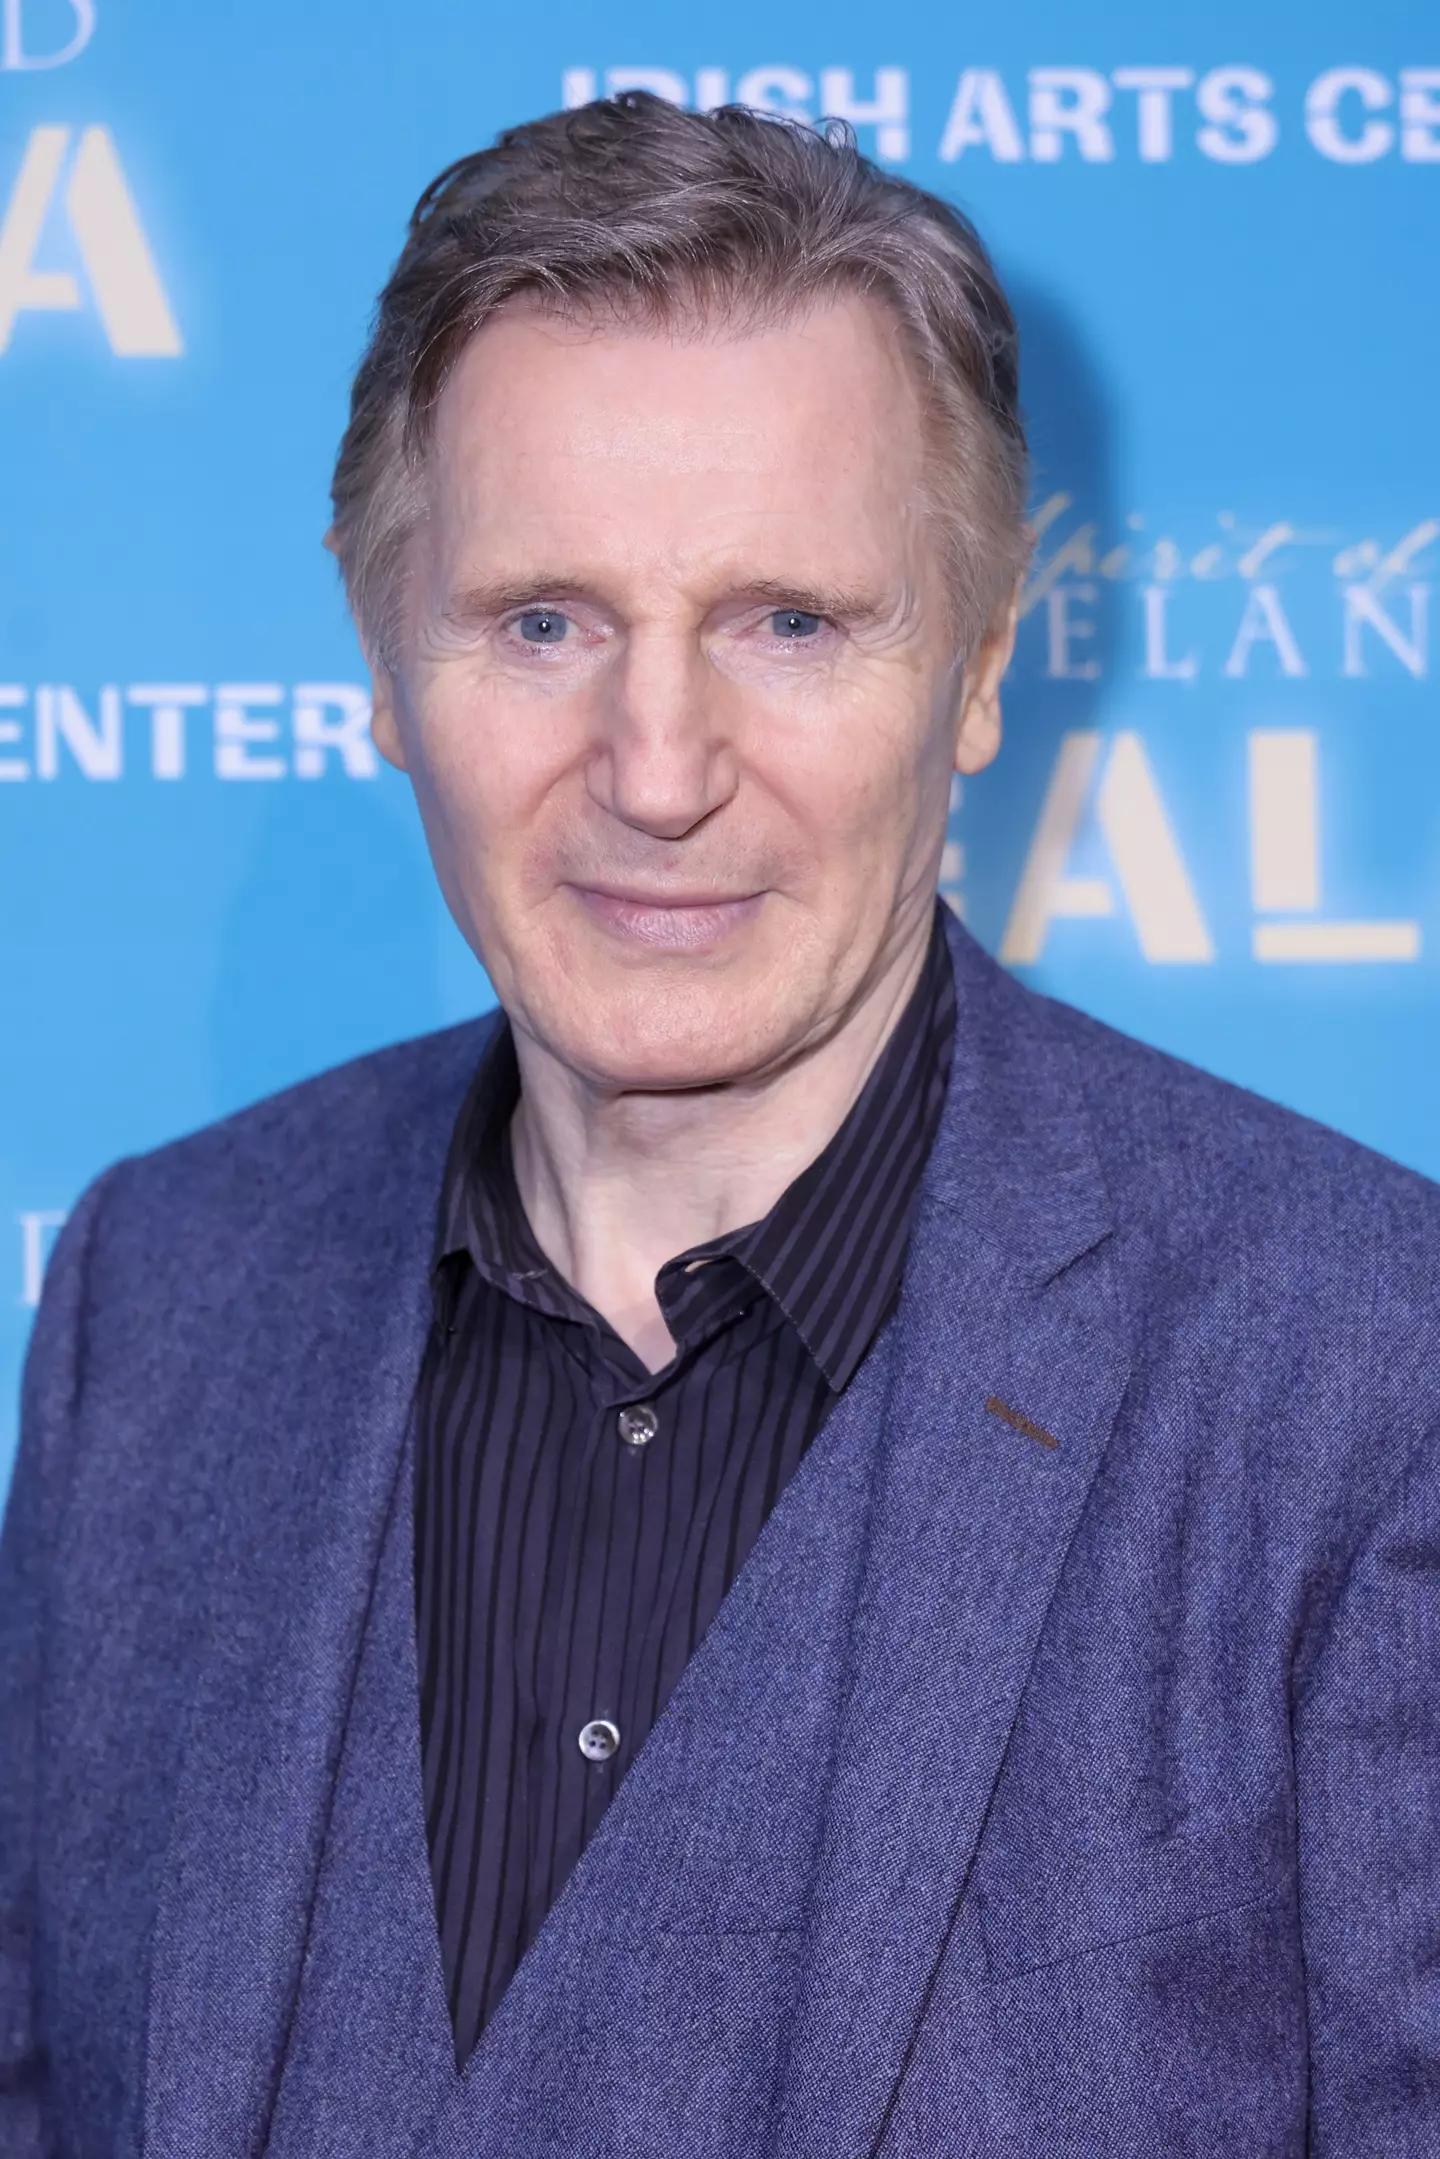 Liam Neeson revealed the priest did not have a good reaction to the confession. (Michael Loccisano/Getty Images)